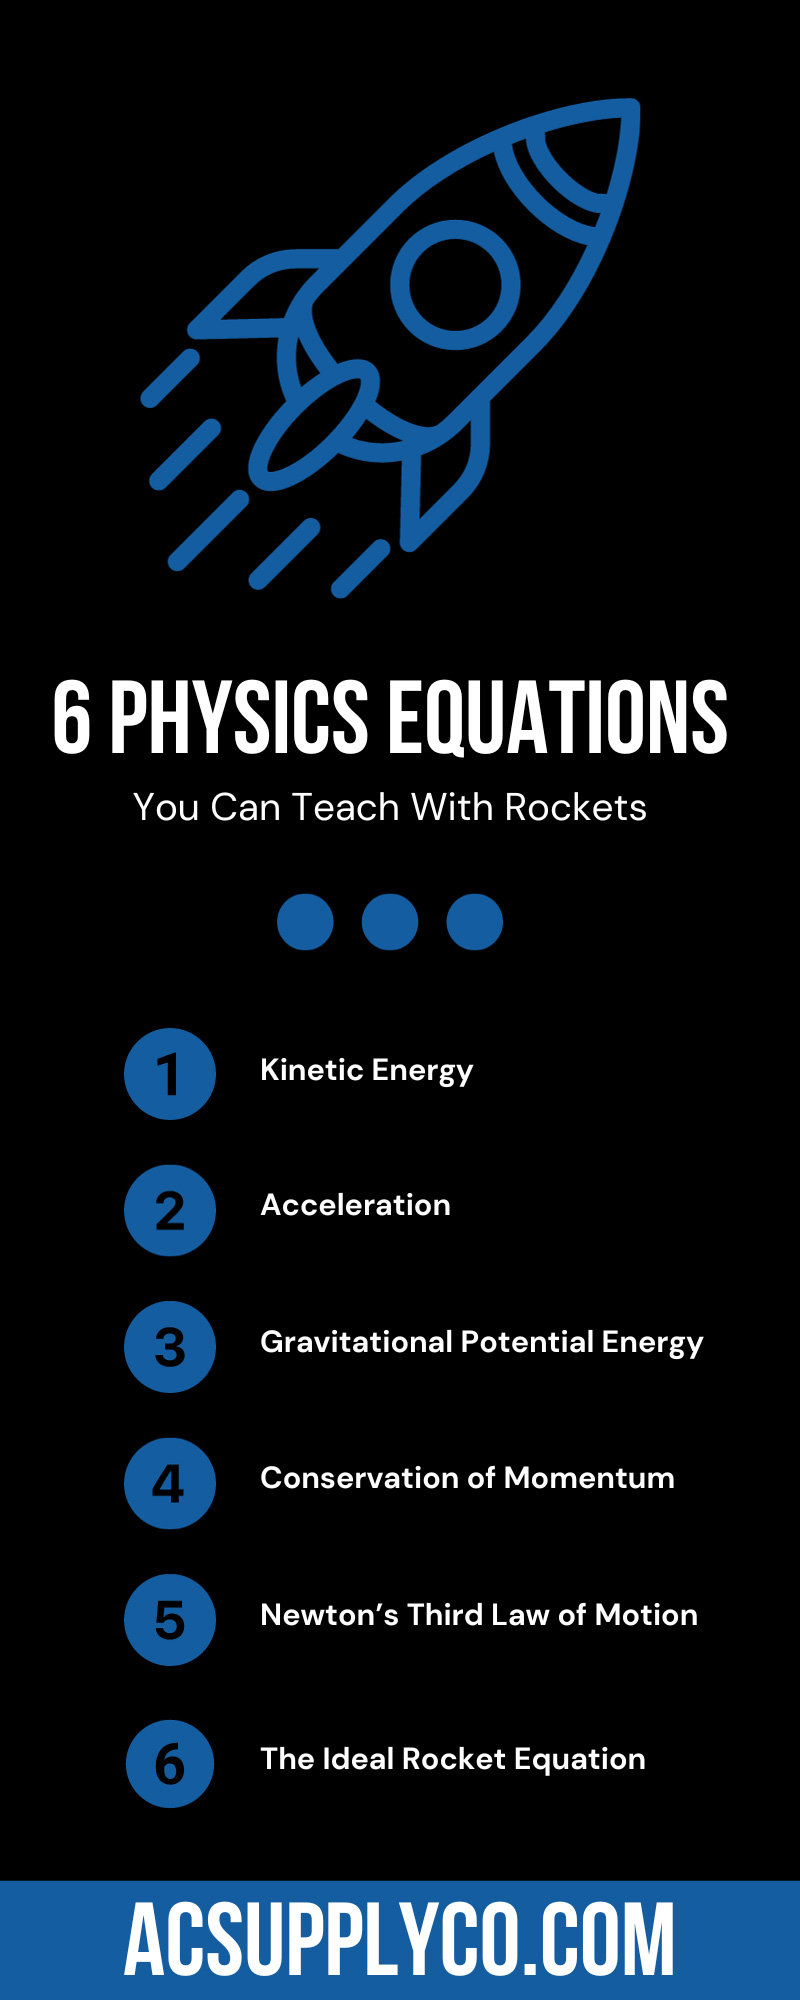 6 Physics Equations You Can Teach With Rockets